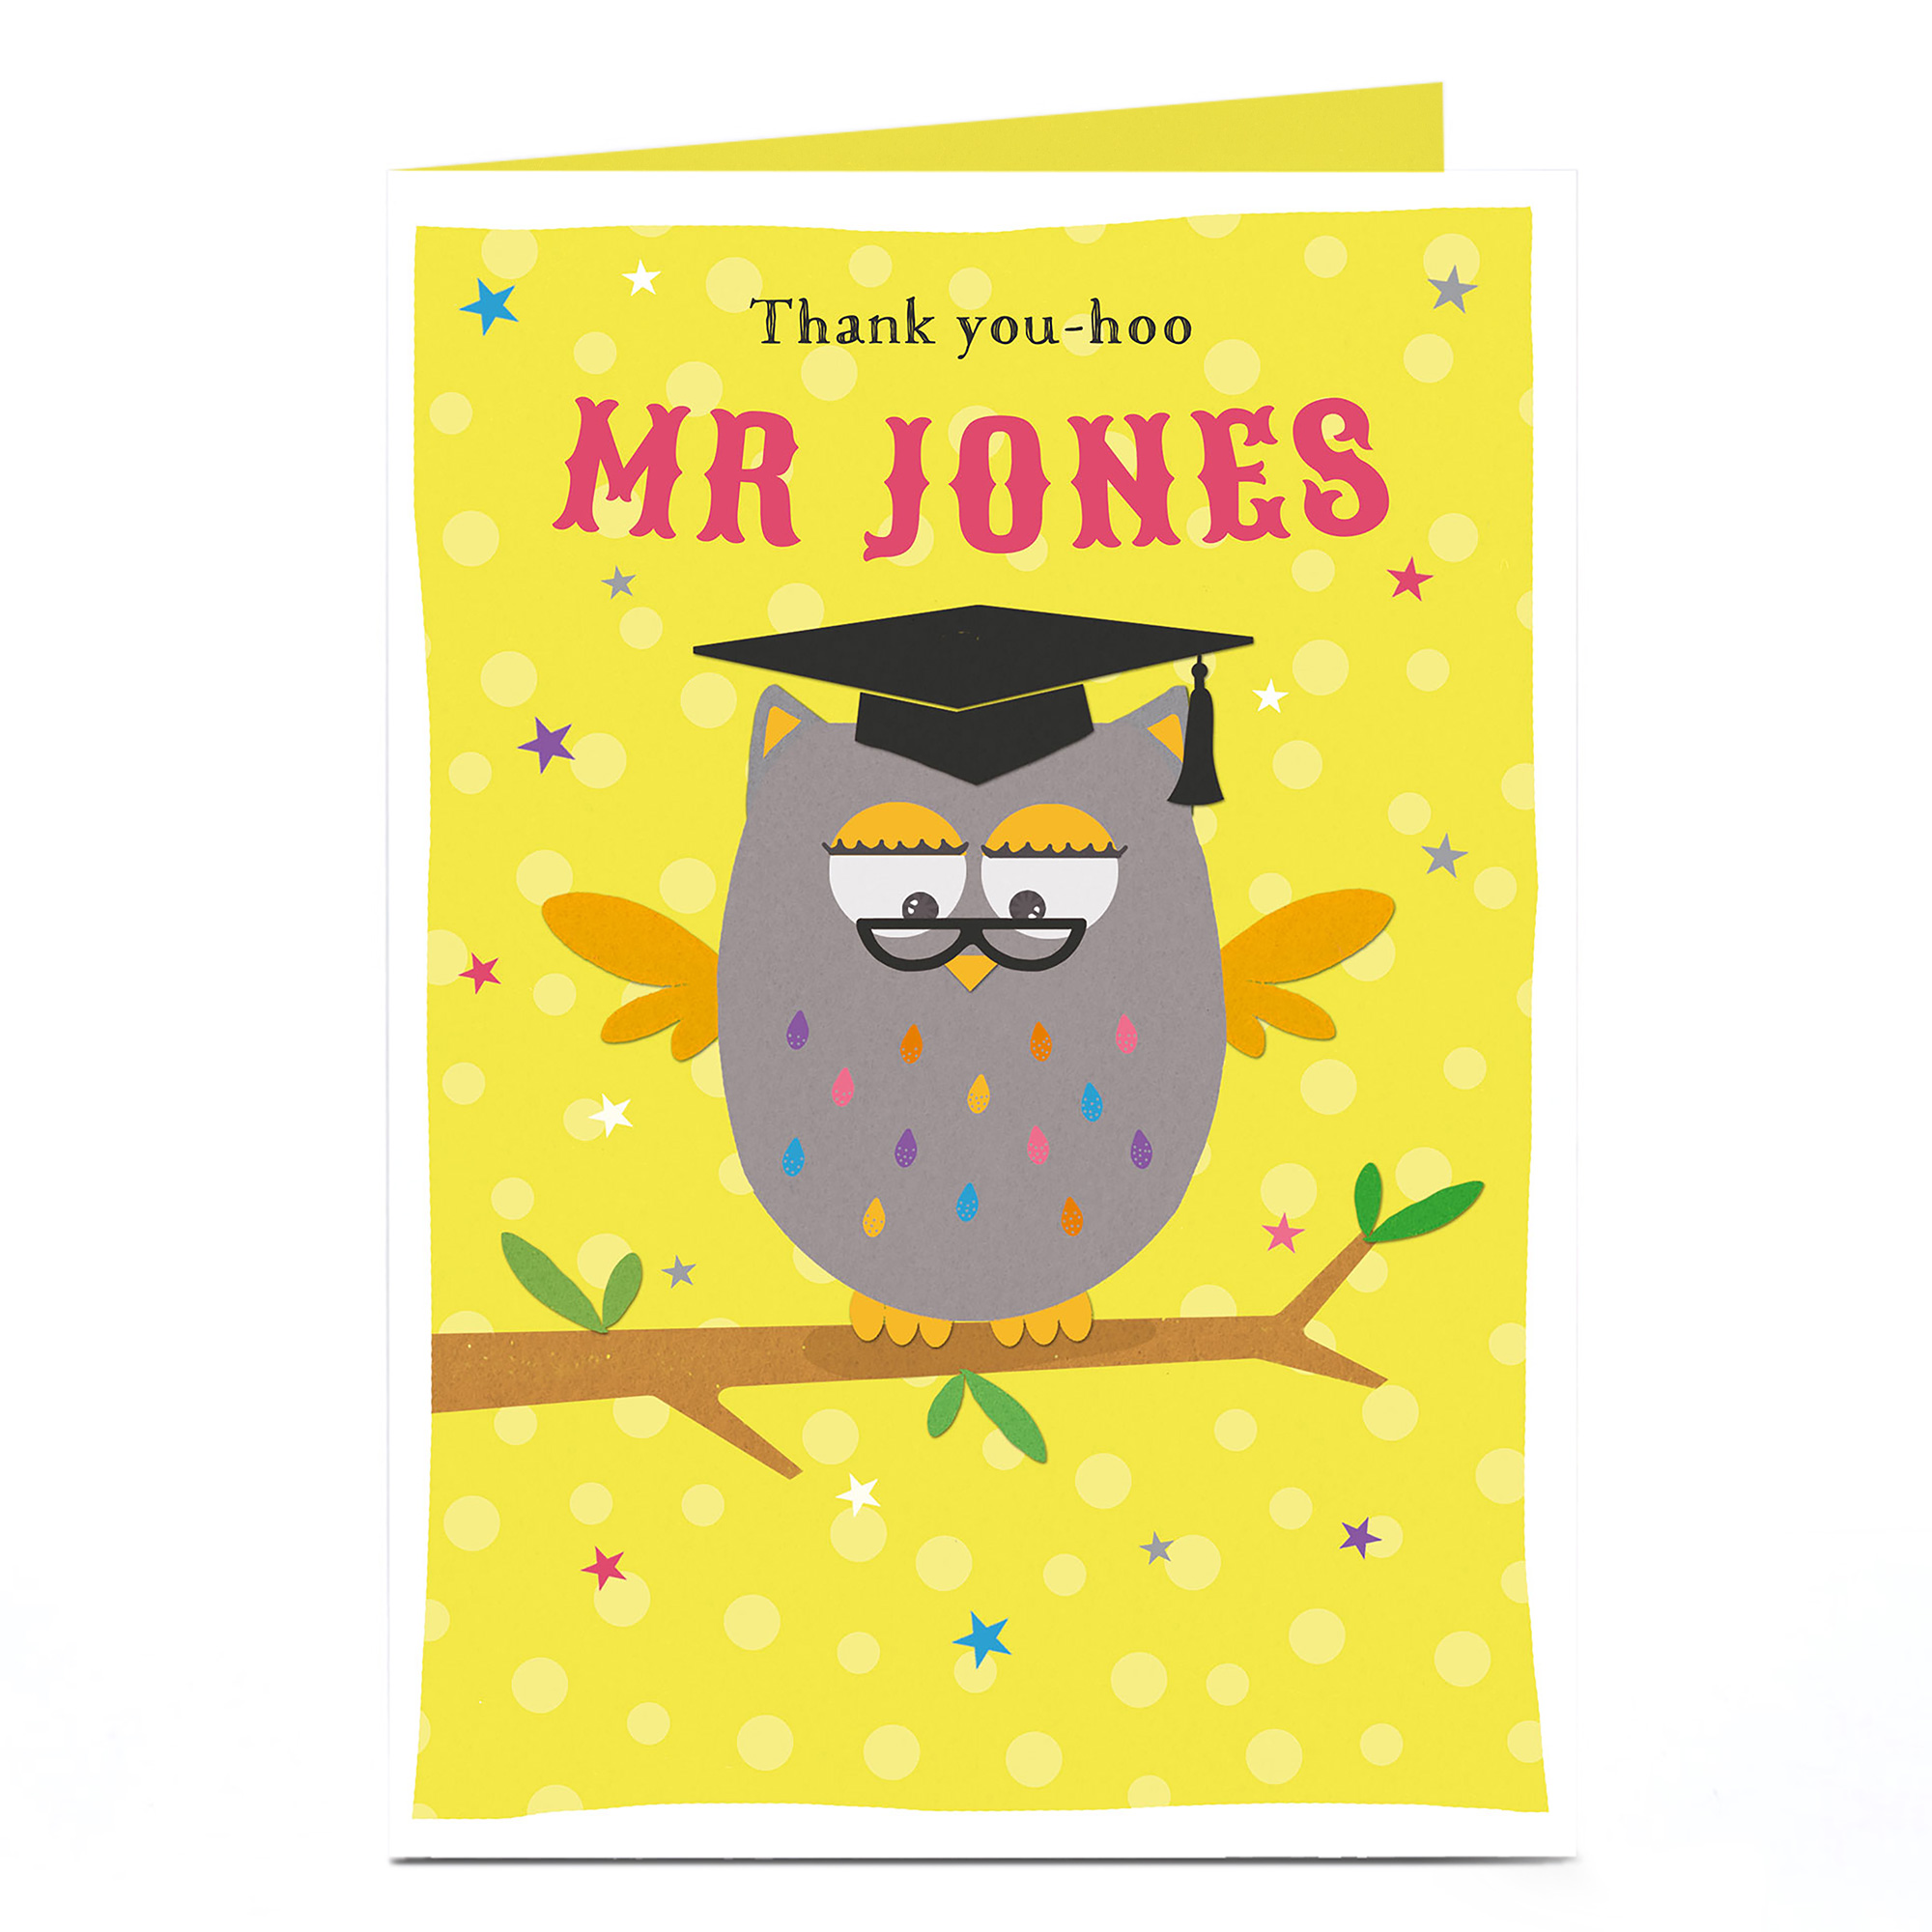 Personalised Thank You Teacher Card - Thank You-Hoo